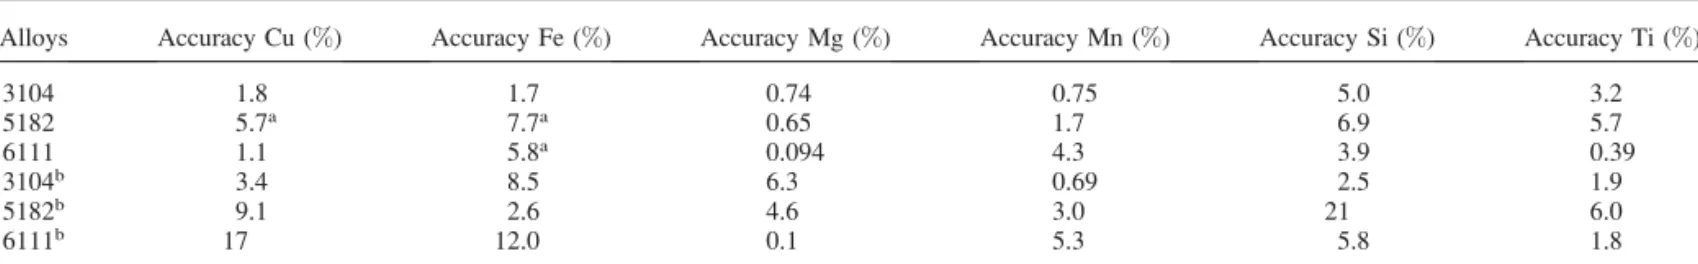 TABLE IV. Relative accuracy obtained from a multi-linear regression model for different alloys in the test set.